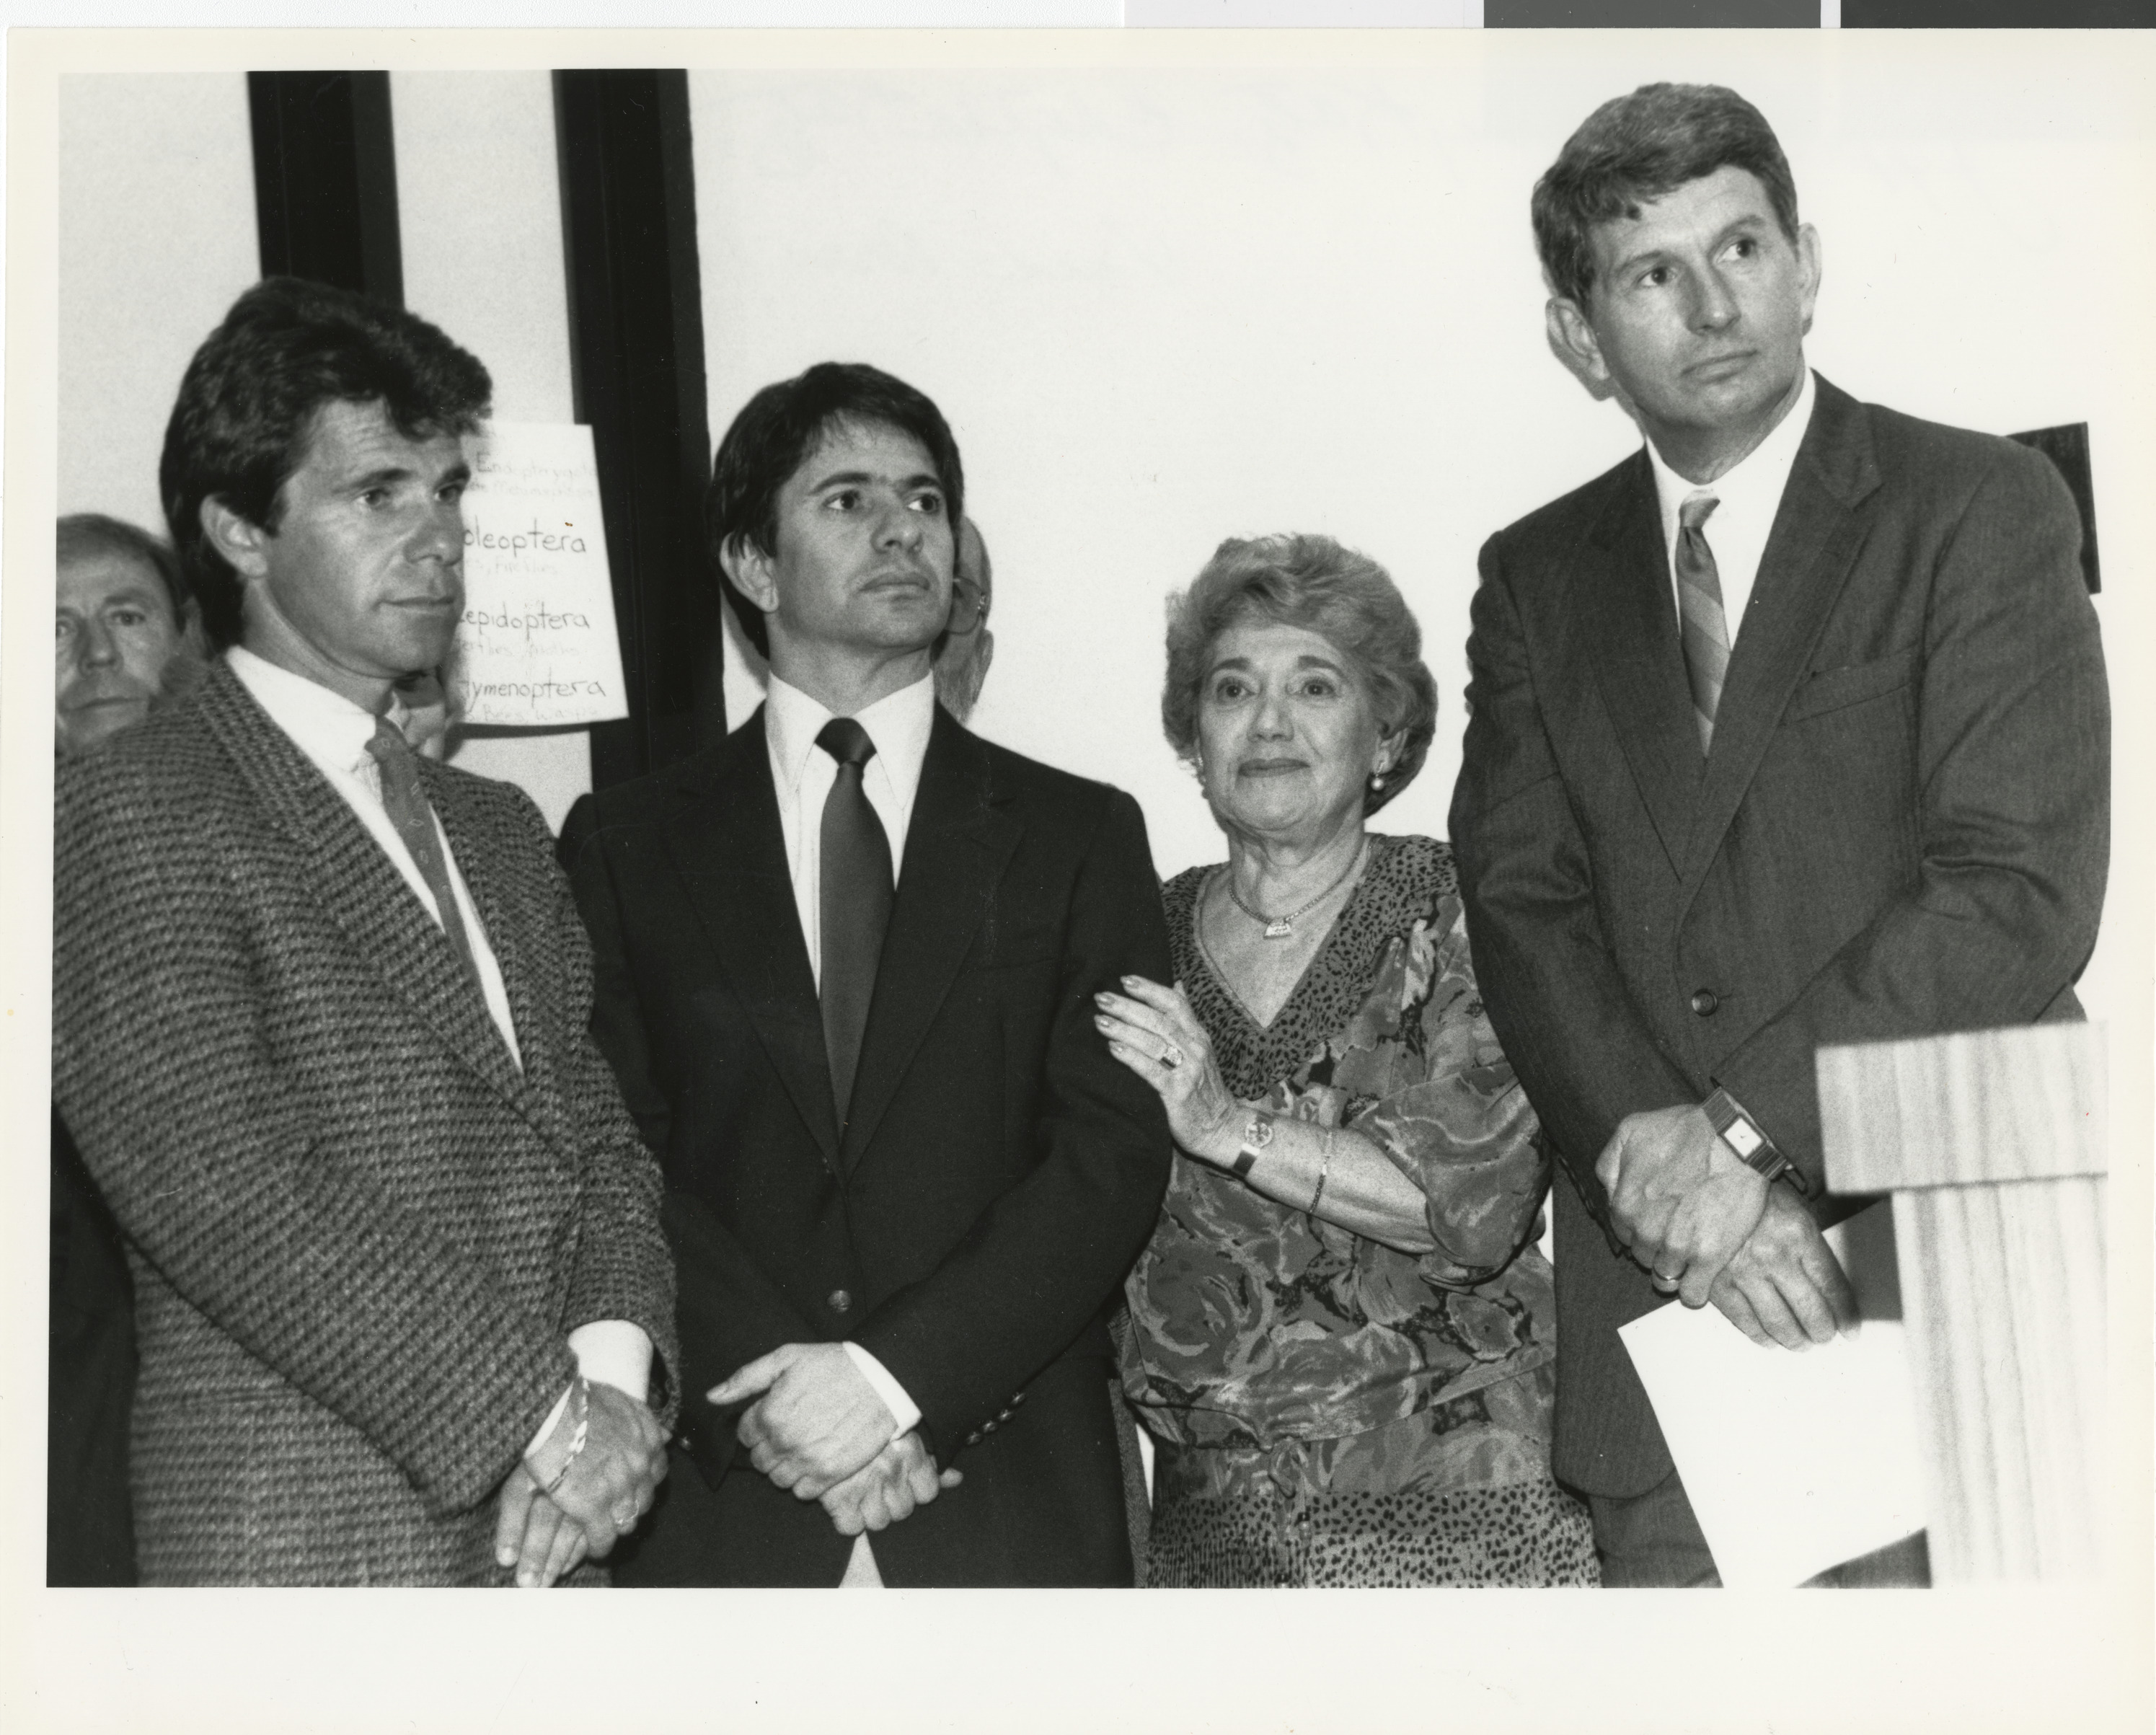 Photograph of Jeffrey and Barry Katz, Edythe Katz and Dr. John Unrue (Vice-President for Academic Affairs) at the dedication of the Lloyd Katz Honors Lounge